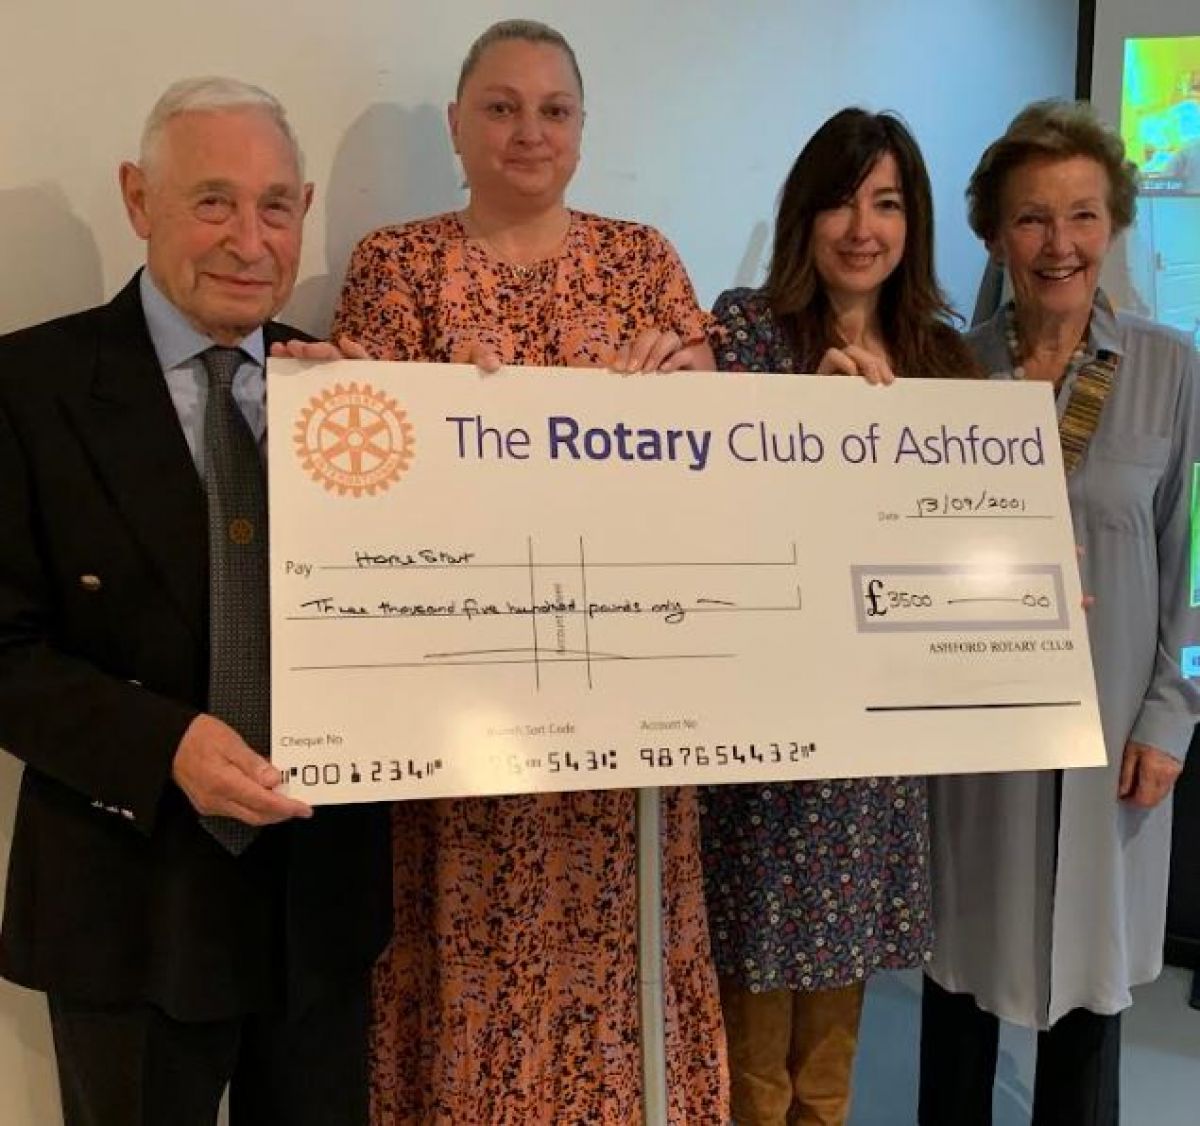 Photographs - Ashford Rotary Club - Former President Lester presents a cheque from the Club to representatives of 'HomeStart', a local charity.